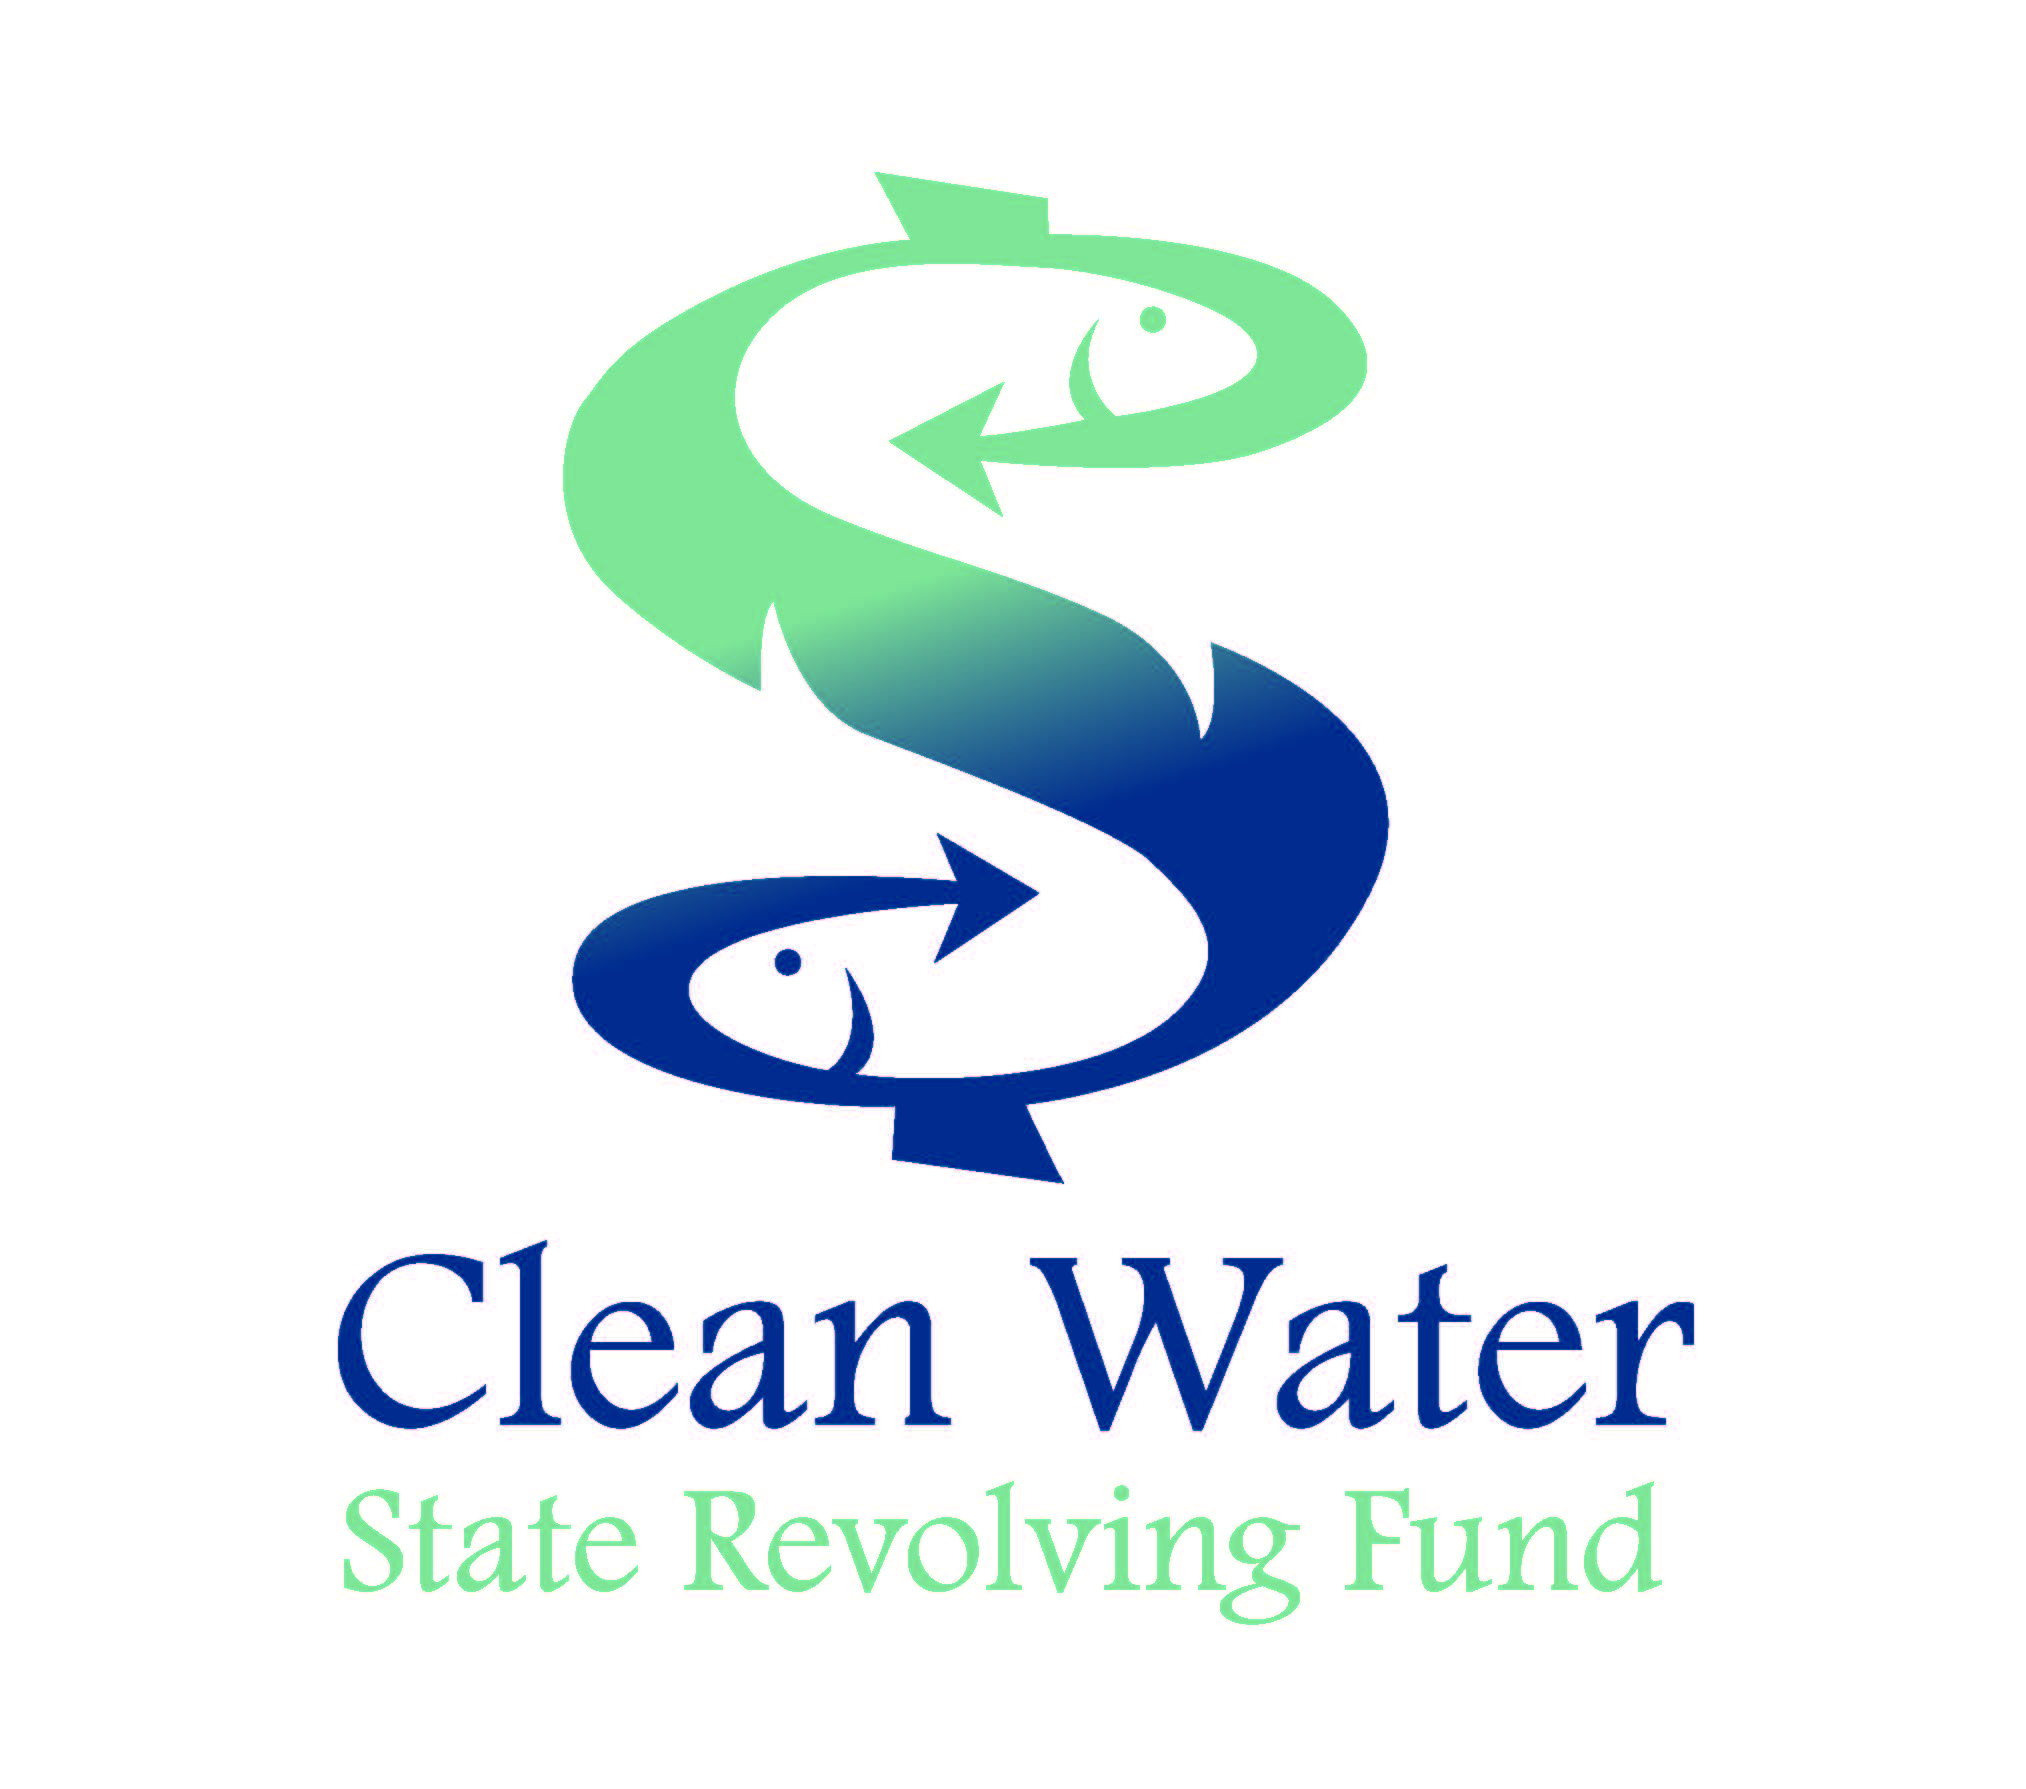 Clean Water State Revolving Fund logo